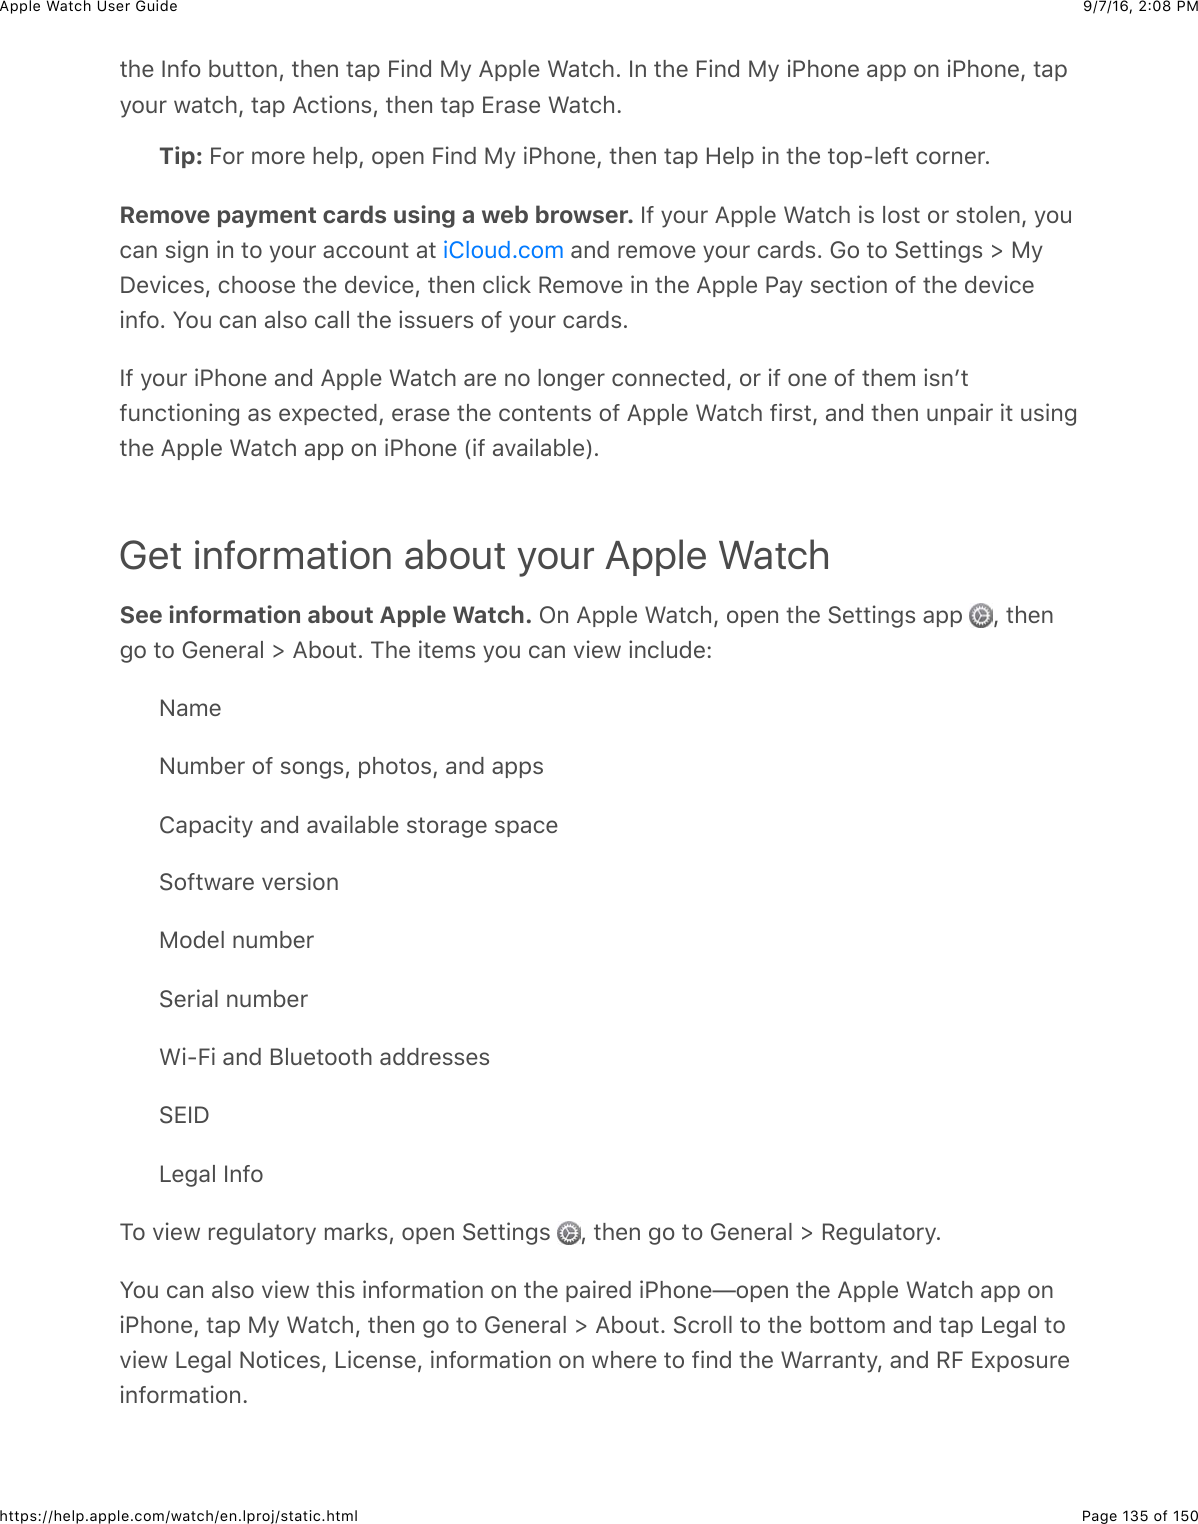 9/7/16, 2)08 PMApple Watch User GuidePage 135 of 150https://help.apple.com/watch/en.lproj/static.html3)%&amp;Y,@#&amp;B433#,J&amp;3)%,&amp;3&apos;2&amp;E+,0&amp;F/&amp;=22&quot;%&amp;&gt;&apos;3()C&amp;Y,&amp;3)%&amp;E+,0&amp;F/&amp;+G)#,%&amp;&apos;22&amp;#,&amp;+G)#,%J&amp;3&apos;2/#4*&amp;7&apos;3()J&amp;3&apos;2&amp;=(3+#,$J&amp;3)%,&amp;3&apos;2&amp;Z*&apos;$%&amp;&gt;&apos;3()CTip: E#*&amp;5#*%&amp;)%&quot;2J&amp;#2%,&amp;E+,0&amp;F/&amp;+G)#,%J&amp;3)%,&amp;3&apos;2&amp;9%&quot;2&amp;+,&amp;3)%&amp;3#2?&quot;%@3&amp;(#*,%*CRemove payment cards using a web browser. Y@&amp;/#4*&amp;=22&quot;%&amp;&gt;&apos;3()&amp;+$&amp;&quot;#$3&amp;#*&amp;$3#&quot;%,J&amp;/#4(&apos;,&amp;$+-,&amp;+,&amp;3#&amp;/#4*&amp;&apos;((#4,3&amp;&apos;3&amp; &amp;&apos;,0&amp;*%5#.%&amp;/#4*&amp;(&apos;*0$C&amp;D#&amp;3#&amp;6%33+,-$&amp;d&amp;F/I%.+(%$J&amp;()##$%&amp;3)%&amp;0%.+(%J&amp;3)%,&amp;(&quot;+(8&amp;H%5#.%&amp;+,&amp;3)%&amp;=22&quot;%&amp;G&apos;/&amp;$%(3+#,&amp;#@&amp;3)%&amp;0%.+(%+,@#C&amp;S#4&amp;(&apos;,&amp;&apos;&quot;$#&amp;(&apos;&quot;&quot;&amp;3)%&amp;+$$4%*$&amp;#@&amp;/#4*&amp;(&apos;*0$CY@&amp;/#4*&amp;+G)#,%&amp;&apos;,0&amp;=22&quot;%&amp;&gt;&apos;3()&amp;&apos;*%&amp;,#&amp;&quot;#,-%*&amp;(#,,%(3%0J&amp;#*&amp;+@&amp;#,%&amp;#@&amp;3)%5&amp;+$,W3@4,(3+#,+,-&amp;&apos;$&amp;%U2%(3%0J&amp;%*&apos;$%&amp;3)%&amp;(#,3%,3$&amp;#@&amp;=22&quot;%&amp;&gt;&apos;3()&amp;@+*$3J&amp;&apos;,0&amp;3)%,&amp;4,2&apos;+*&amp;+3&amp;4$+,-3)%&amp;=22&quot;%&amp;&gt;&apos;3()&amp;&apos;22&amp;#,&amp;+G)#,%&amp;P+@&amp;&apos;.&apos;+&quot;&apos;B&quot;%RCGet information about your Apple WatchSee information about Apple Watch. L,&amp;=22&quot;%&amp;&gt;&apos;3()J&amp;#2%,&amp;3)%&amp;6%33+,-$&amp;&apos;22&amp; J&amp;3)%,-#&amp;3#&amp;D%,%*&apos;&quot;&amp;d&amp;=B#43C&amp;1)%&amp;+3%5$&amp;/#4&amp;(&apos;,&amp;.+%7&amp;+,(&quot;40%eA&apos;5%A45B%*&amp;#@&amp;$#,-$J&amp;2)#3#$J&amp;&apos;,0&amp;&apos;22$!&apos;2&apos;(+3/&amp;&apos;,0&amp;&apos;.&apos;+&quot;&apos;B&quot;%&amp;$3#*&apos;-%&amp;$2&apos;(%6#@37&apos;*%&amp;.%*$+#,F#0%&quot;&amp;,45B%*6%*+&apos;&quot;&amp;,45B%*&gt;+?E+&amp;&apos;,0&amp;;&quot;4%3##3)&amp;&apos;00*%$$%$6ZYI&lt;%-&apos;&quot;&amp;Y,@#1#&amp;.+%7&amp;*%-4&quot;&apos;3#*/&amp;5&apos;*8$J&amp;#2%,&amp;6%33+,-$&amp; J&amp;3)%,&amp;-#&amp;3#&amp;D%,%*&apos;&quot;&amp;d&amp;H%-4&quot;&apos;3#*/CS#4&amp;(&apos;,&amp;&apos;&quot;$#&amp;.+%7&amp;3)+$&amp;+,@#*5&apos;3+#,&amp;#,&amp;3)%&amp;2&apos;+*%0&amp;+G)#,%T#2%,&amp;3)%&amp;=22&quot;%&amp;&gt;&apos;3()&amp;&apos;22&amp;#,+G)#,%J&amp;3&apos;2&amp;F/&amp;&gt;&apos;3()J&amp;3)%,&amp;-#&amp;3#&amp;D%,%*&apos;&quot;&amp;d&amp;=B#43C&amp;6(*#&quot;&quot;&amp;3#&amp;3)%&amp;B#33#5&amp;&apos;,0&amp;3&apos;2&amp;&lt;%-&apos;&quot;&amp;3#.+%7&amp;&lt;%-&apos;&quot;&amp;A#3+(%$J&amp;&lt;+(%,$%J&amp;+,@#*5&apos;3+#,&amp;#,&amp;7)%*%&amp;3#&amp;@+,0&amp;3)%&amp;&gt;&apos;**&apos;,3/J&amp;&apos;,0&amp;HE&amp;ZU2#$4*%+,@#*5&apos;3+#,C+!&quot;#40C(#5